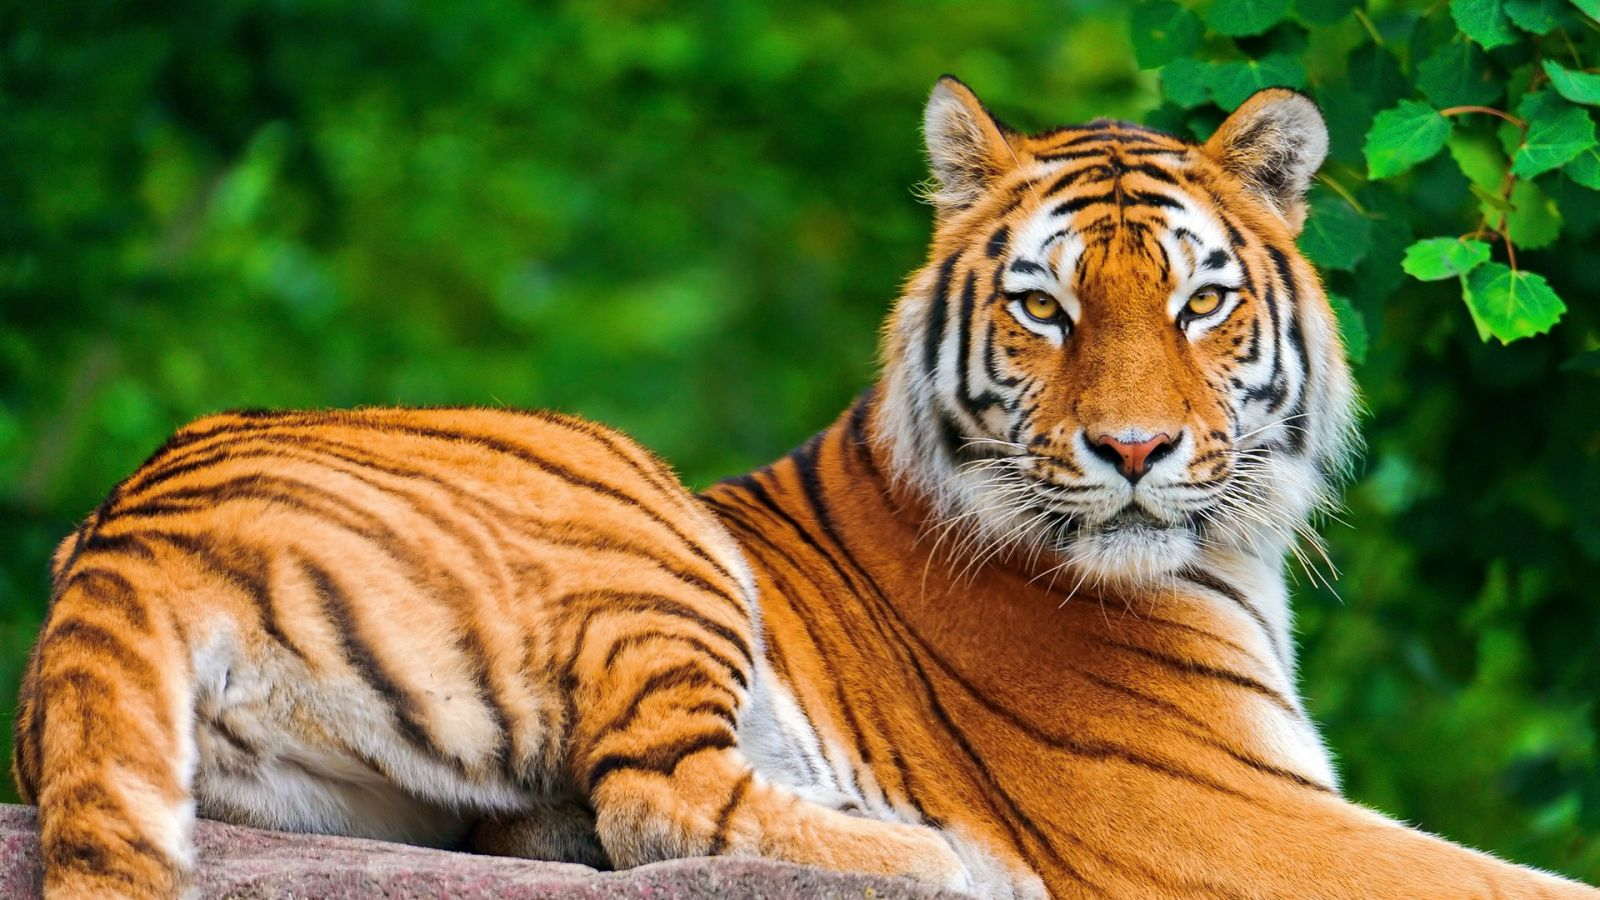 Animals Hd Pictures Download - Tiger Hd - HD Wallpaper 